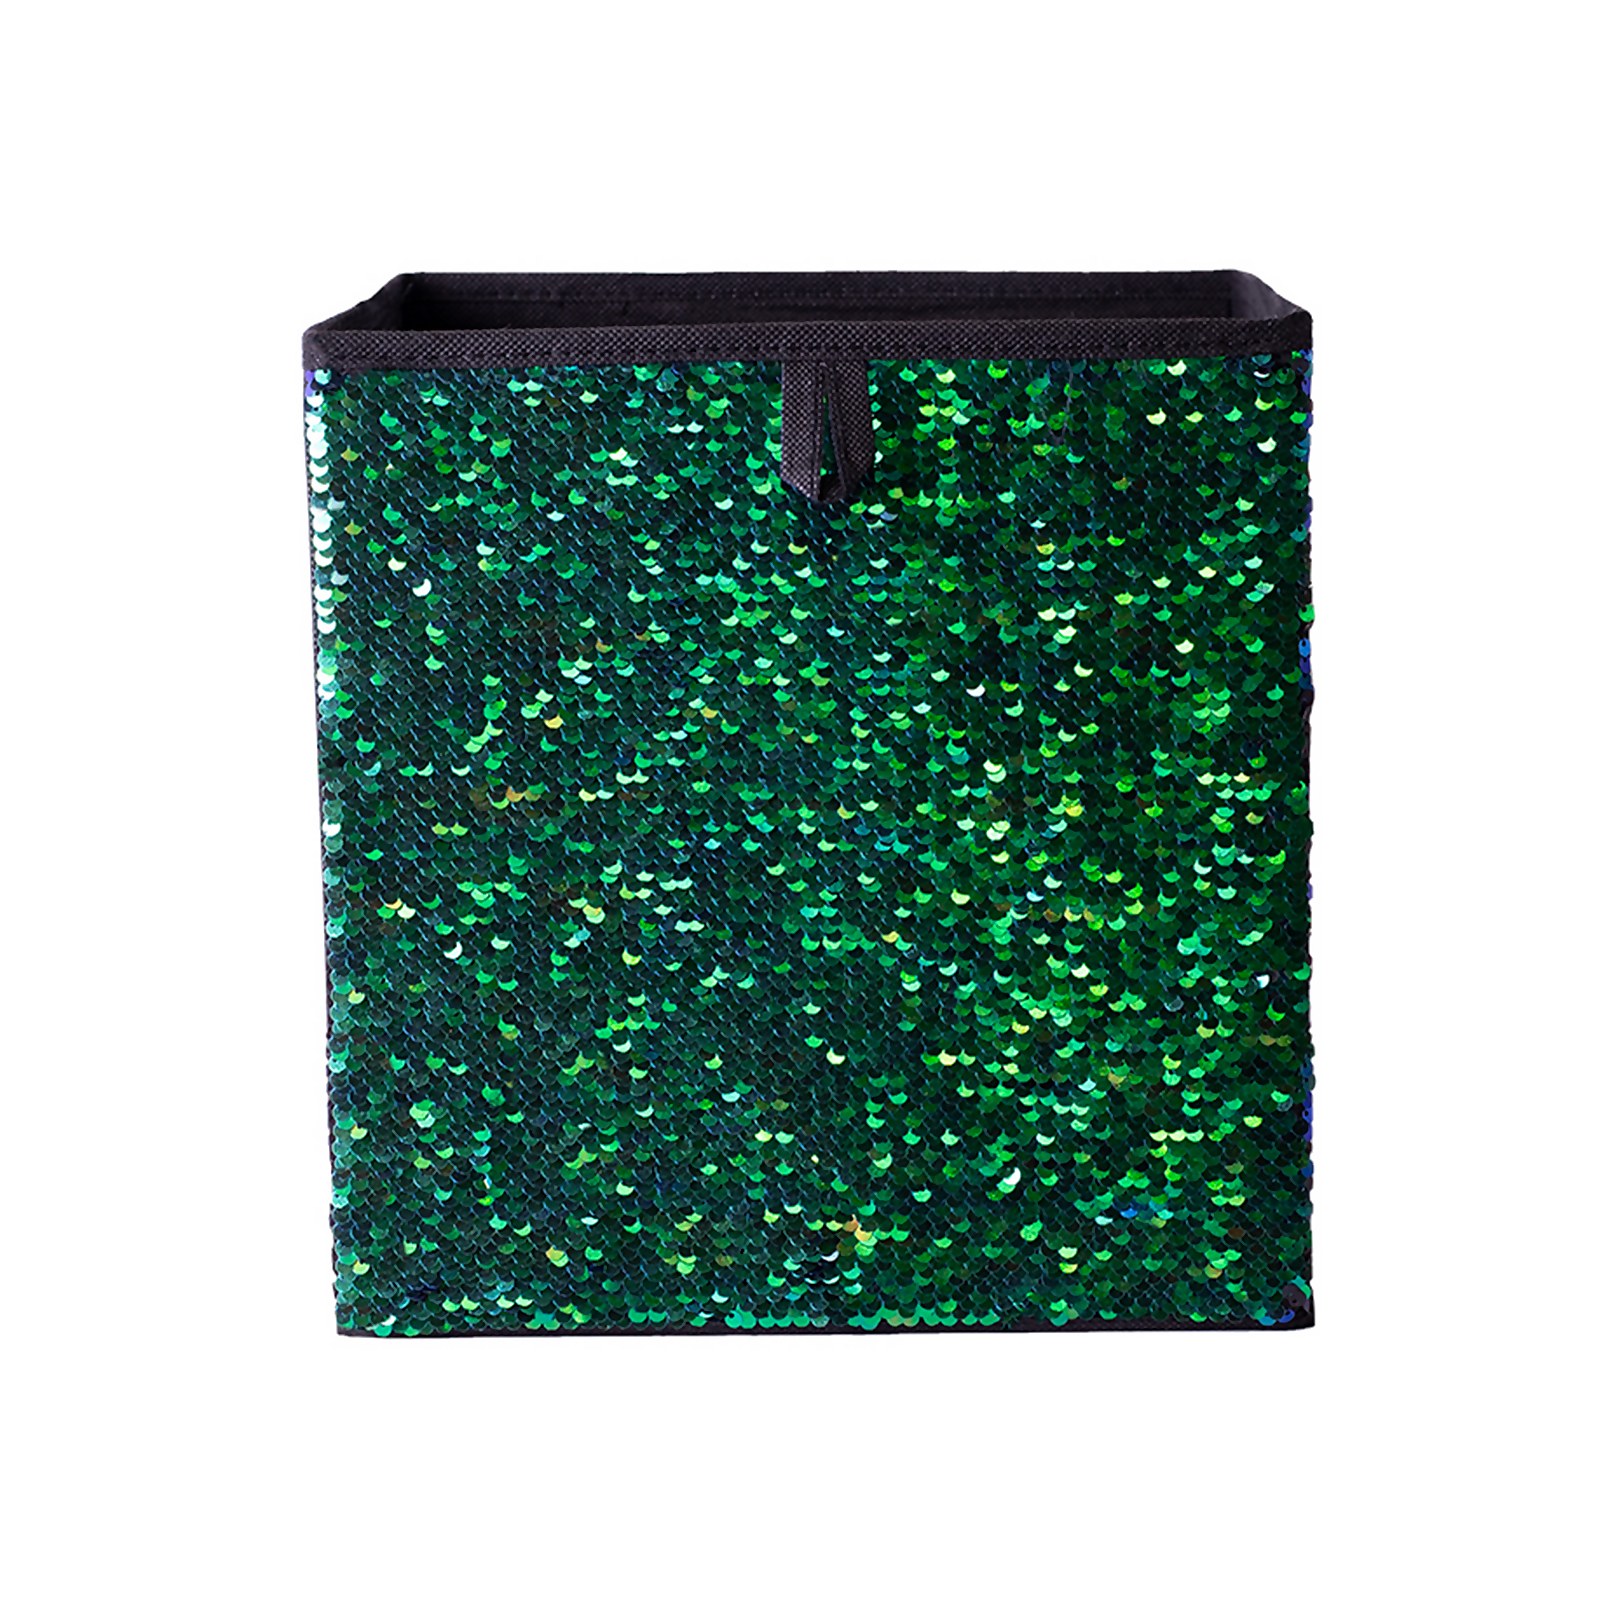 Photo of Living Elements Compact Cube Sequin Drawing Insert - Black